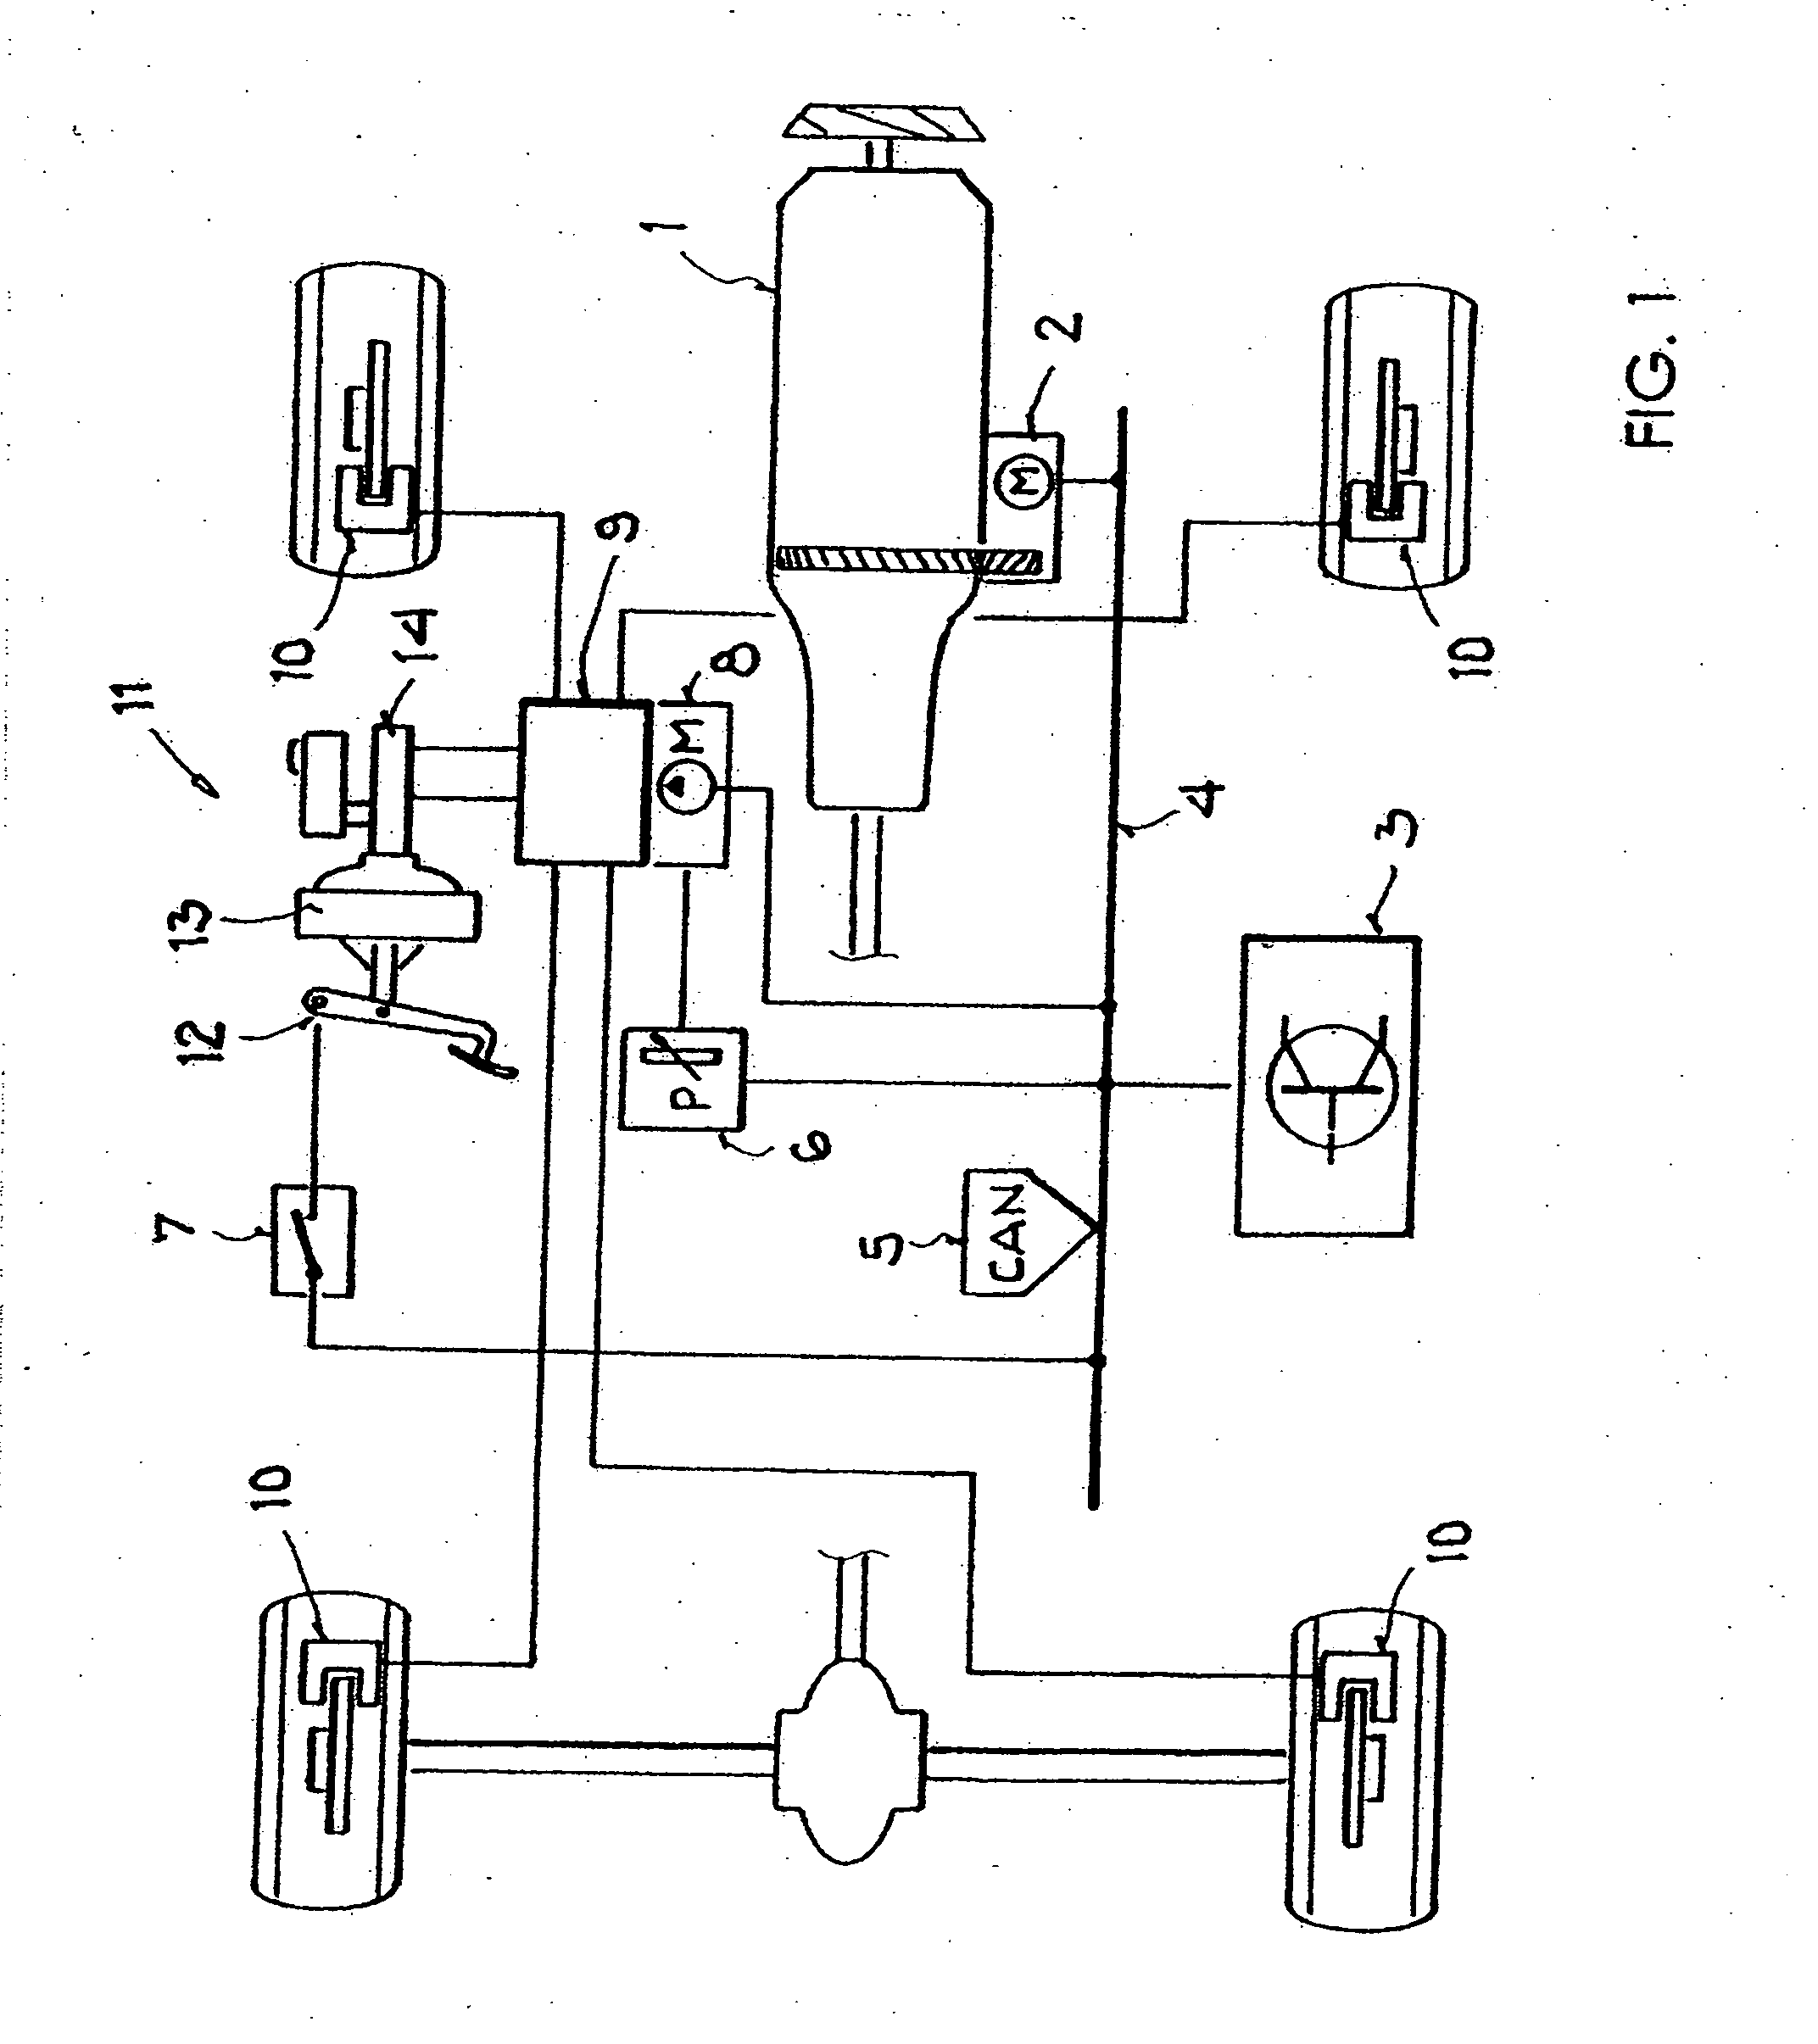 Method for automatically starting an internal combustion engine